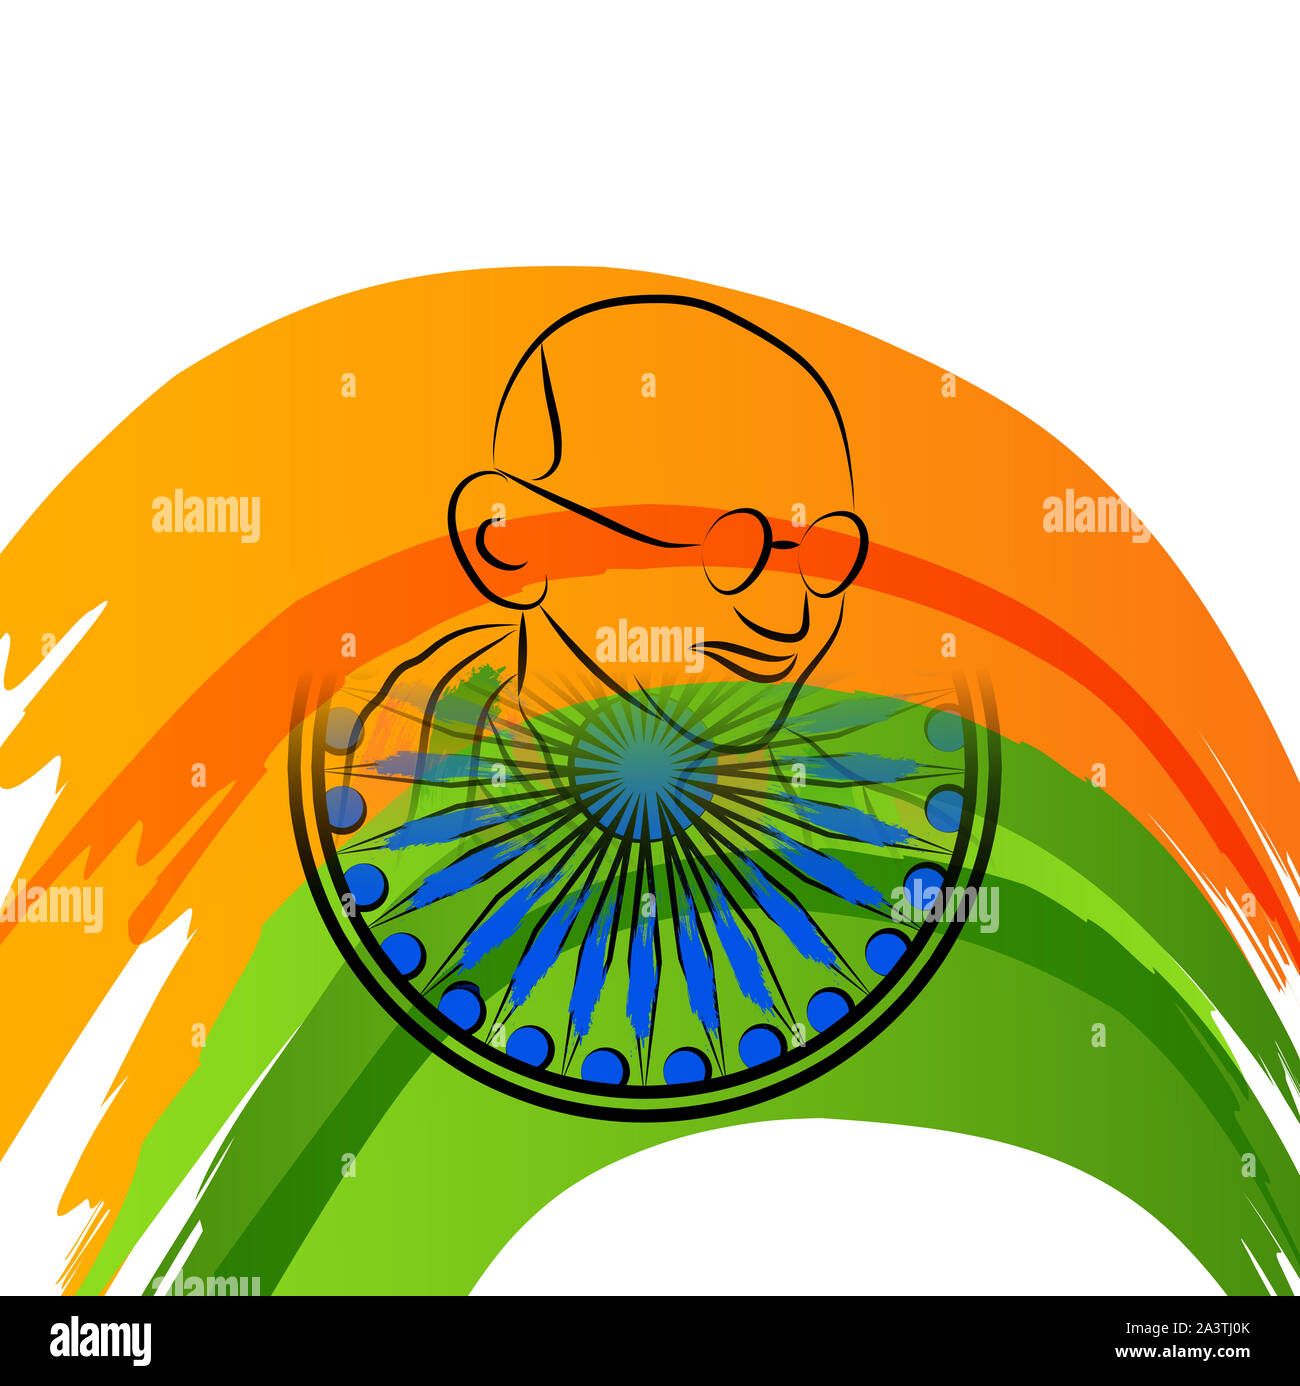 illustration of a background or poster for Happy Gandhi Jayanti or 2nd  October Stock Photo - Alamy